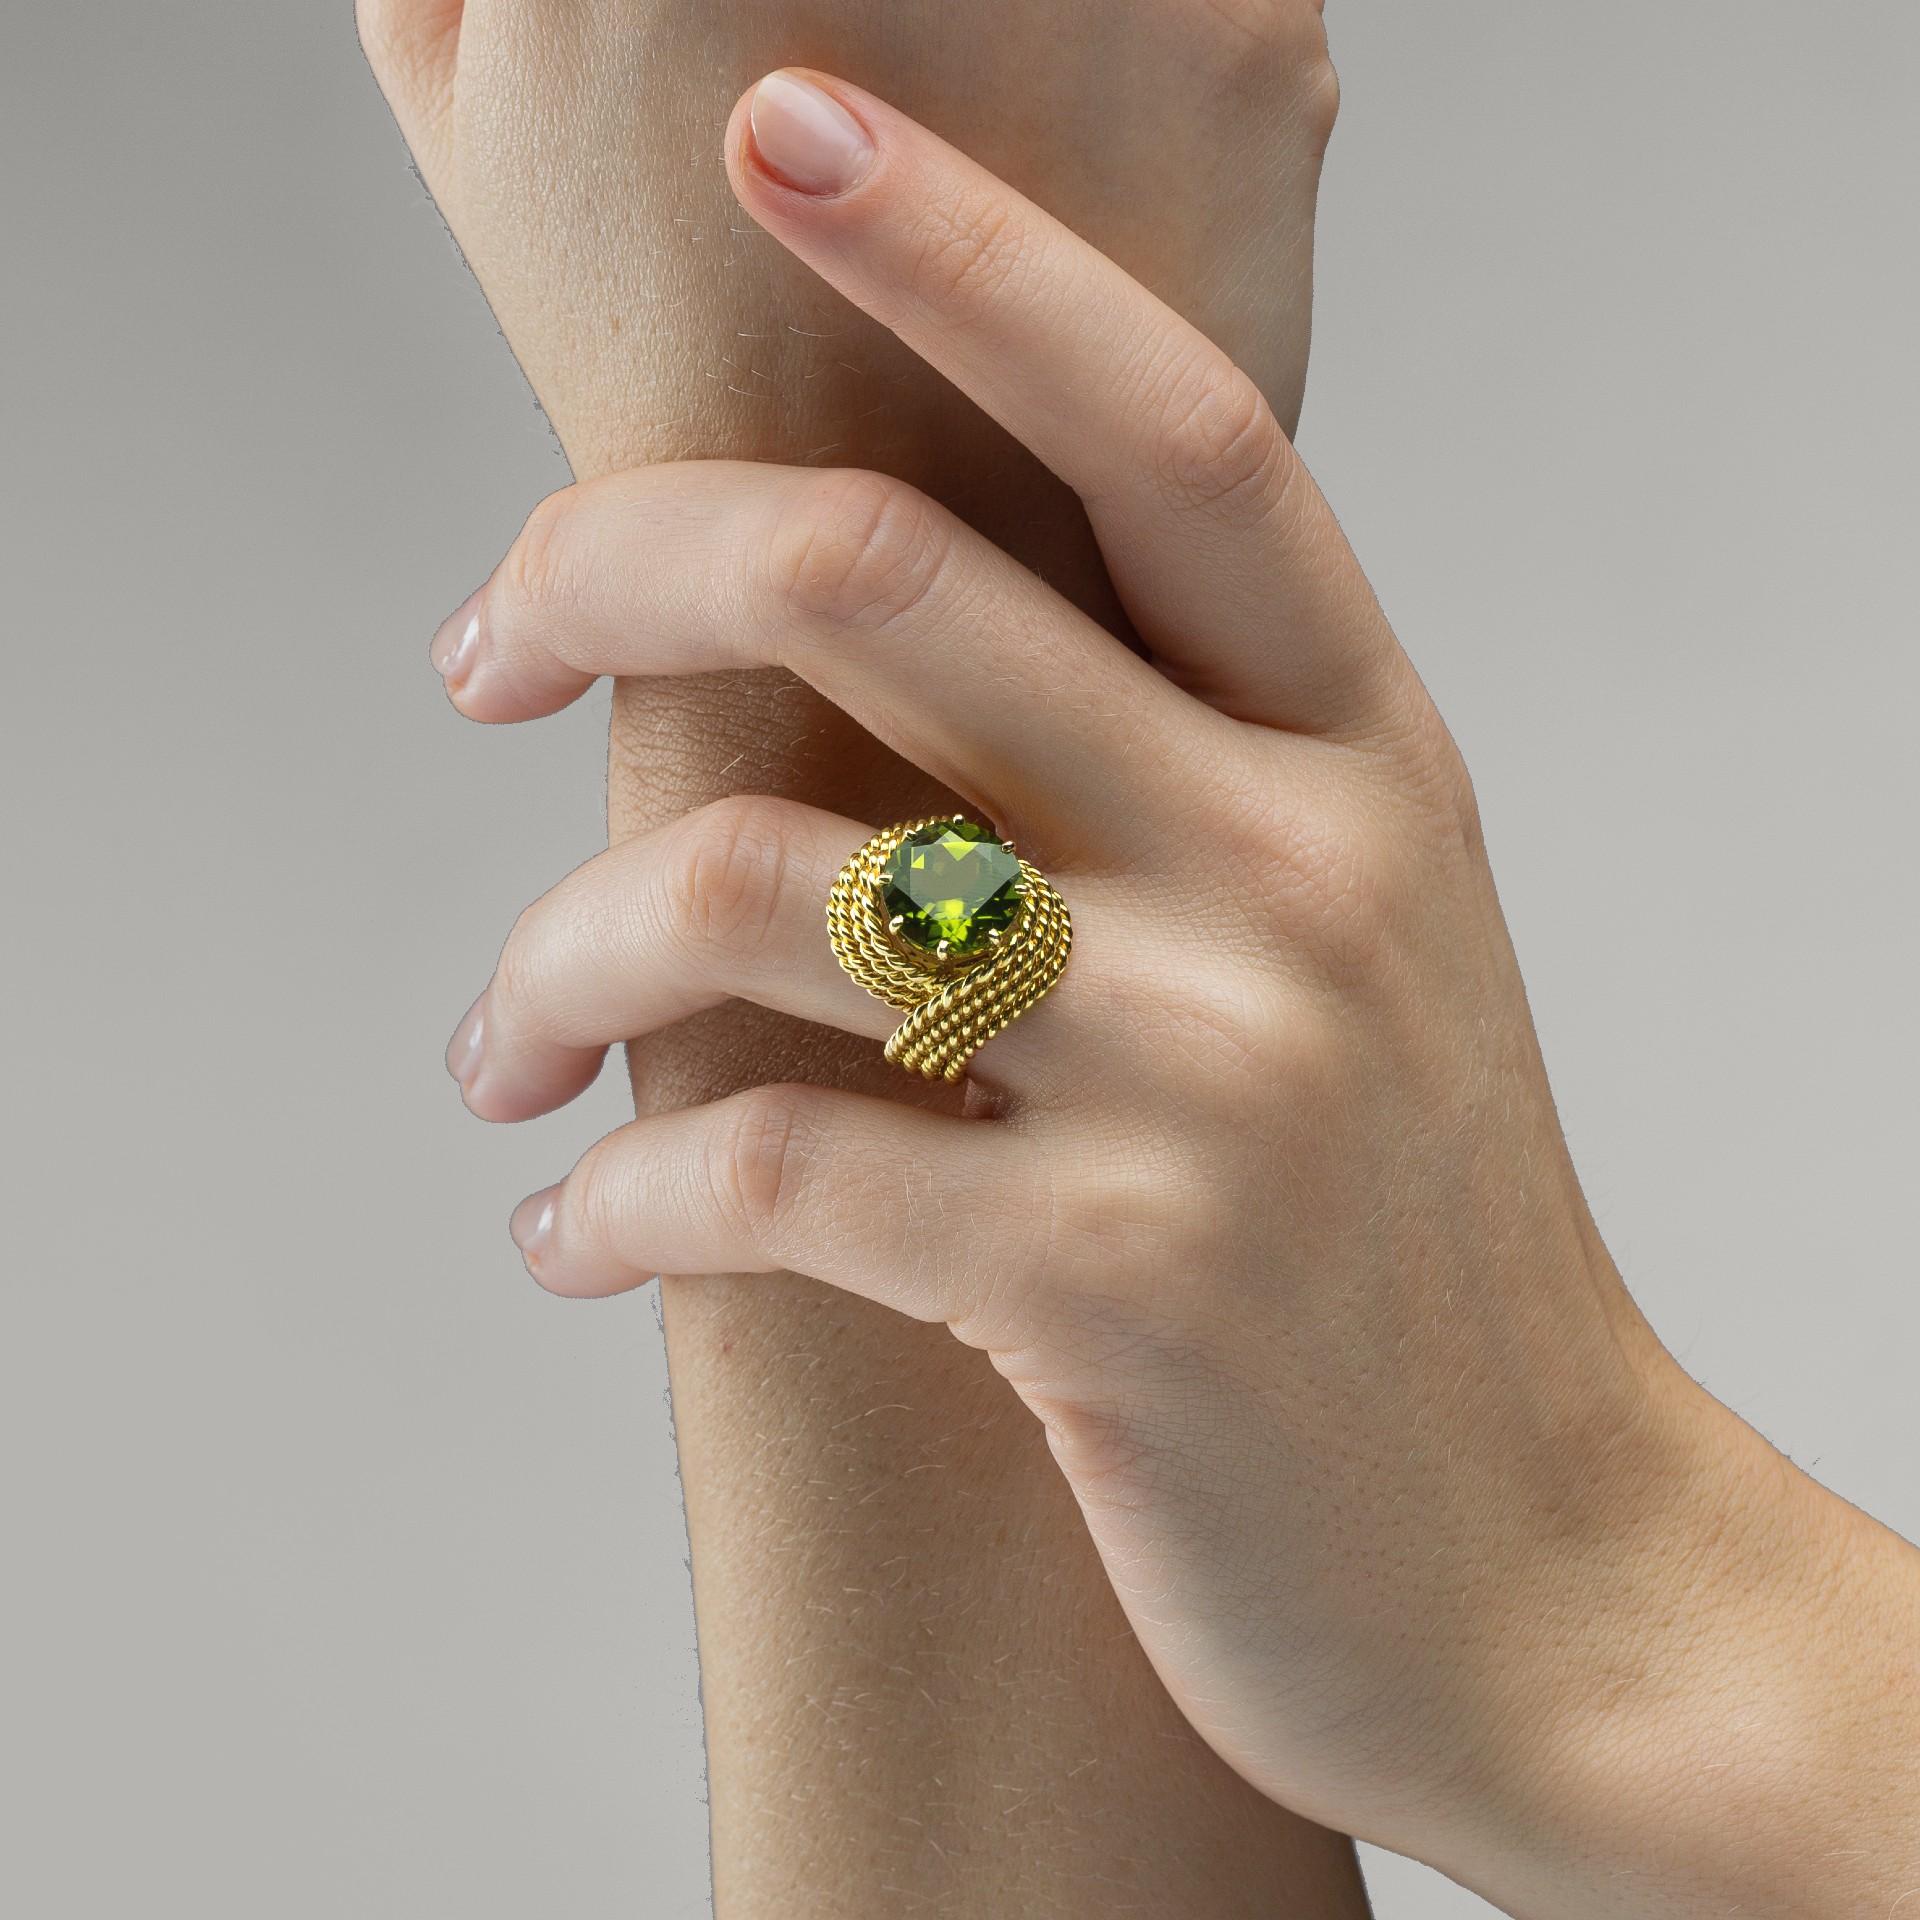 Alex Jona design collection, hand crafted in Italy, 18 karat yellow gold Nou Nou ring centering a 3.82 carats round cut peridot, wrapped by twisted wire gold threads.

Alex Jona jewels stand out, not only for their special design and for the